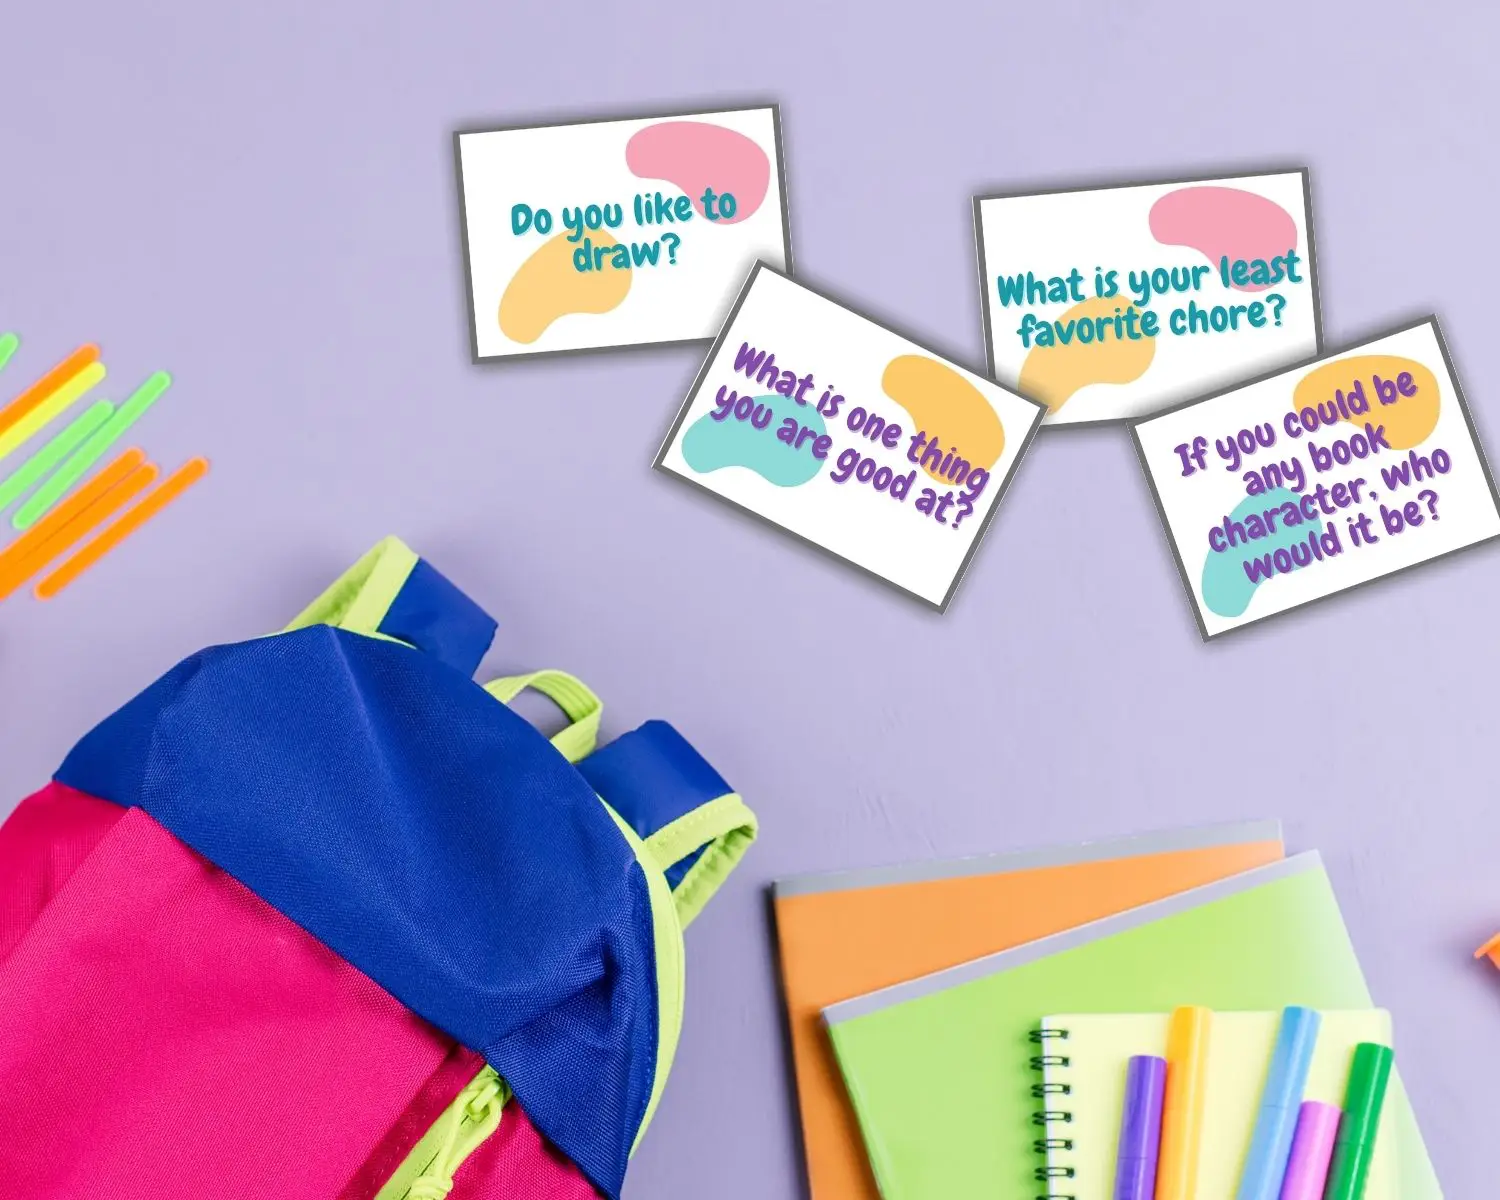 Kids conversation starters lay near a colorful backpack and notebooks